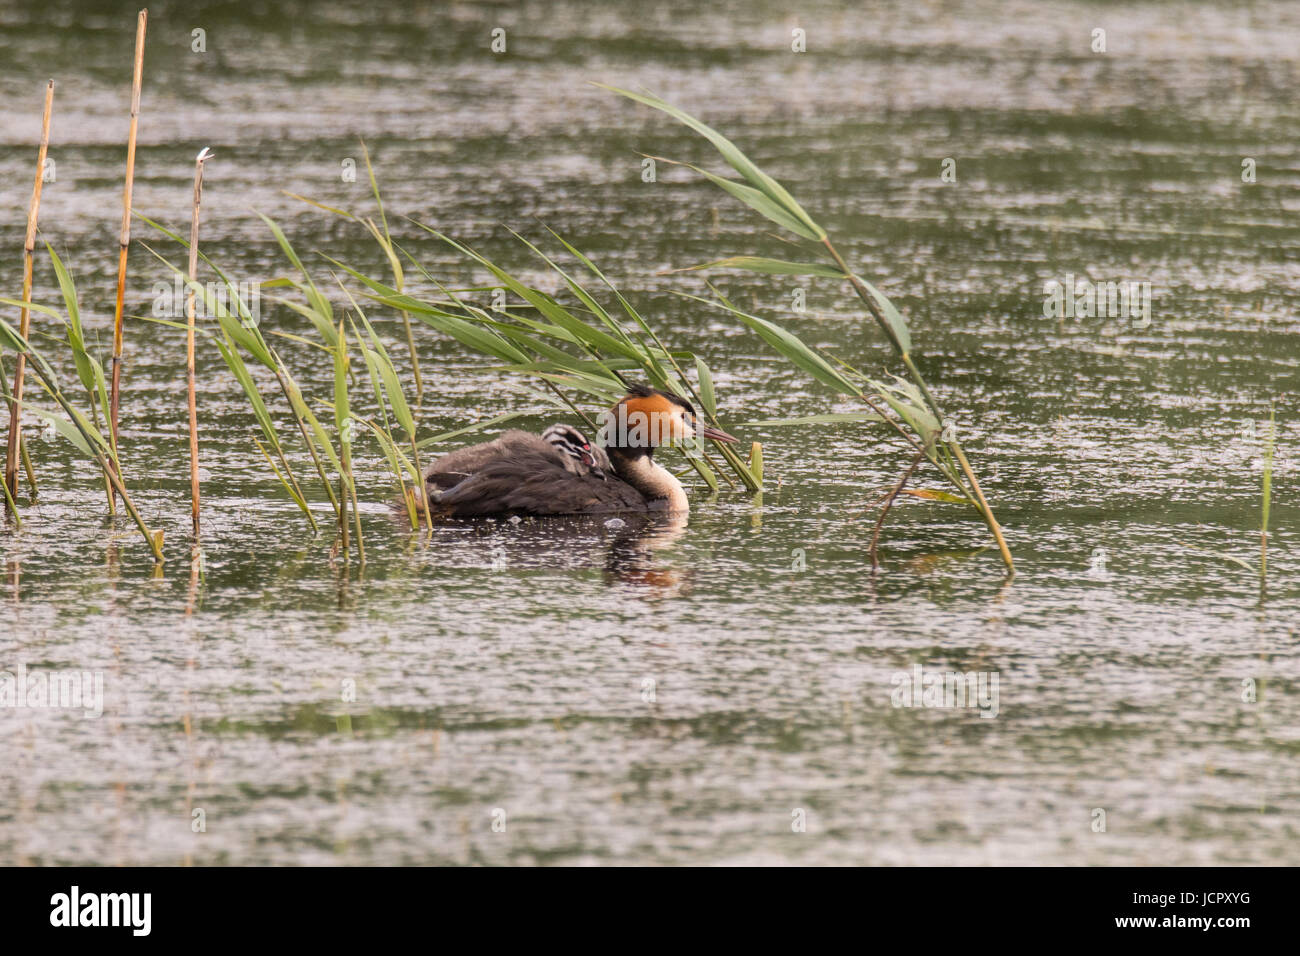 Great crested grebe (Podiceps cristatus) with chick on back. Elegant waterbird in the family Podicipedidae carrying young among reeds Stock Photo